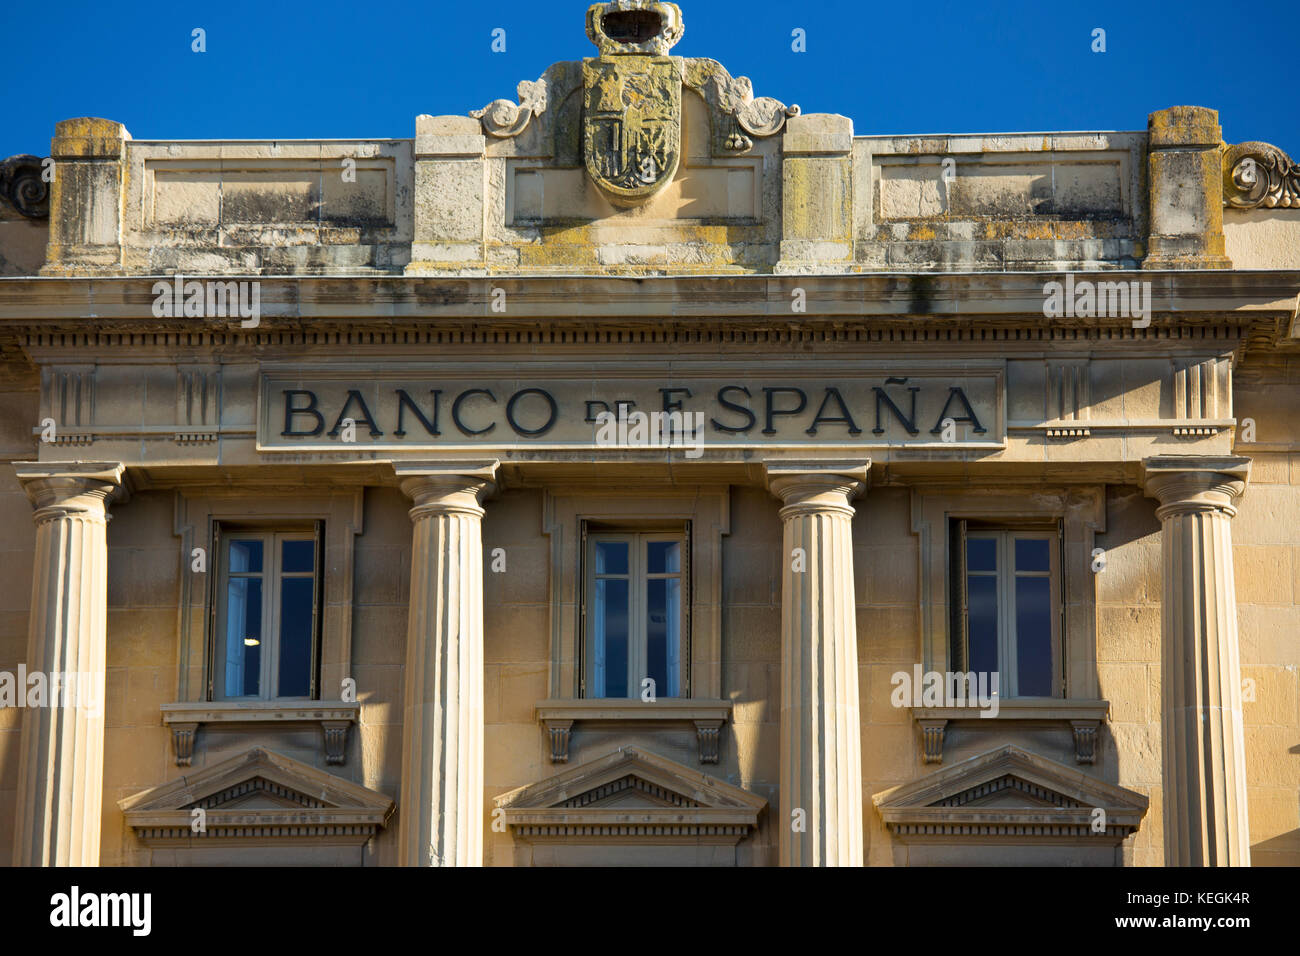 Bank of Spain, Banco de Espana, traditional architecture in the town of Haro in La Rioja province of Northern Spain Stock Photo